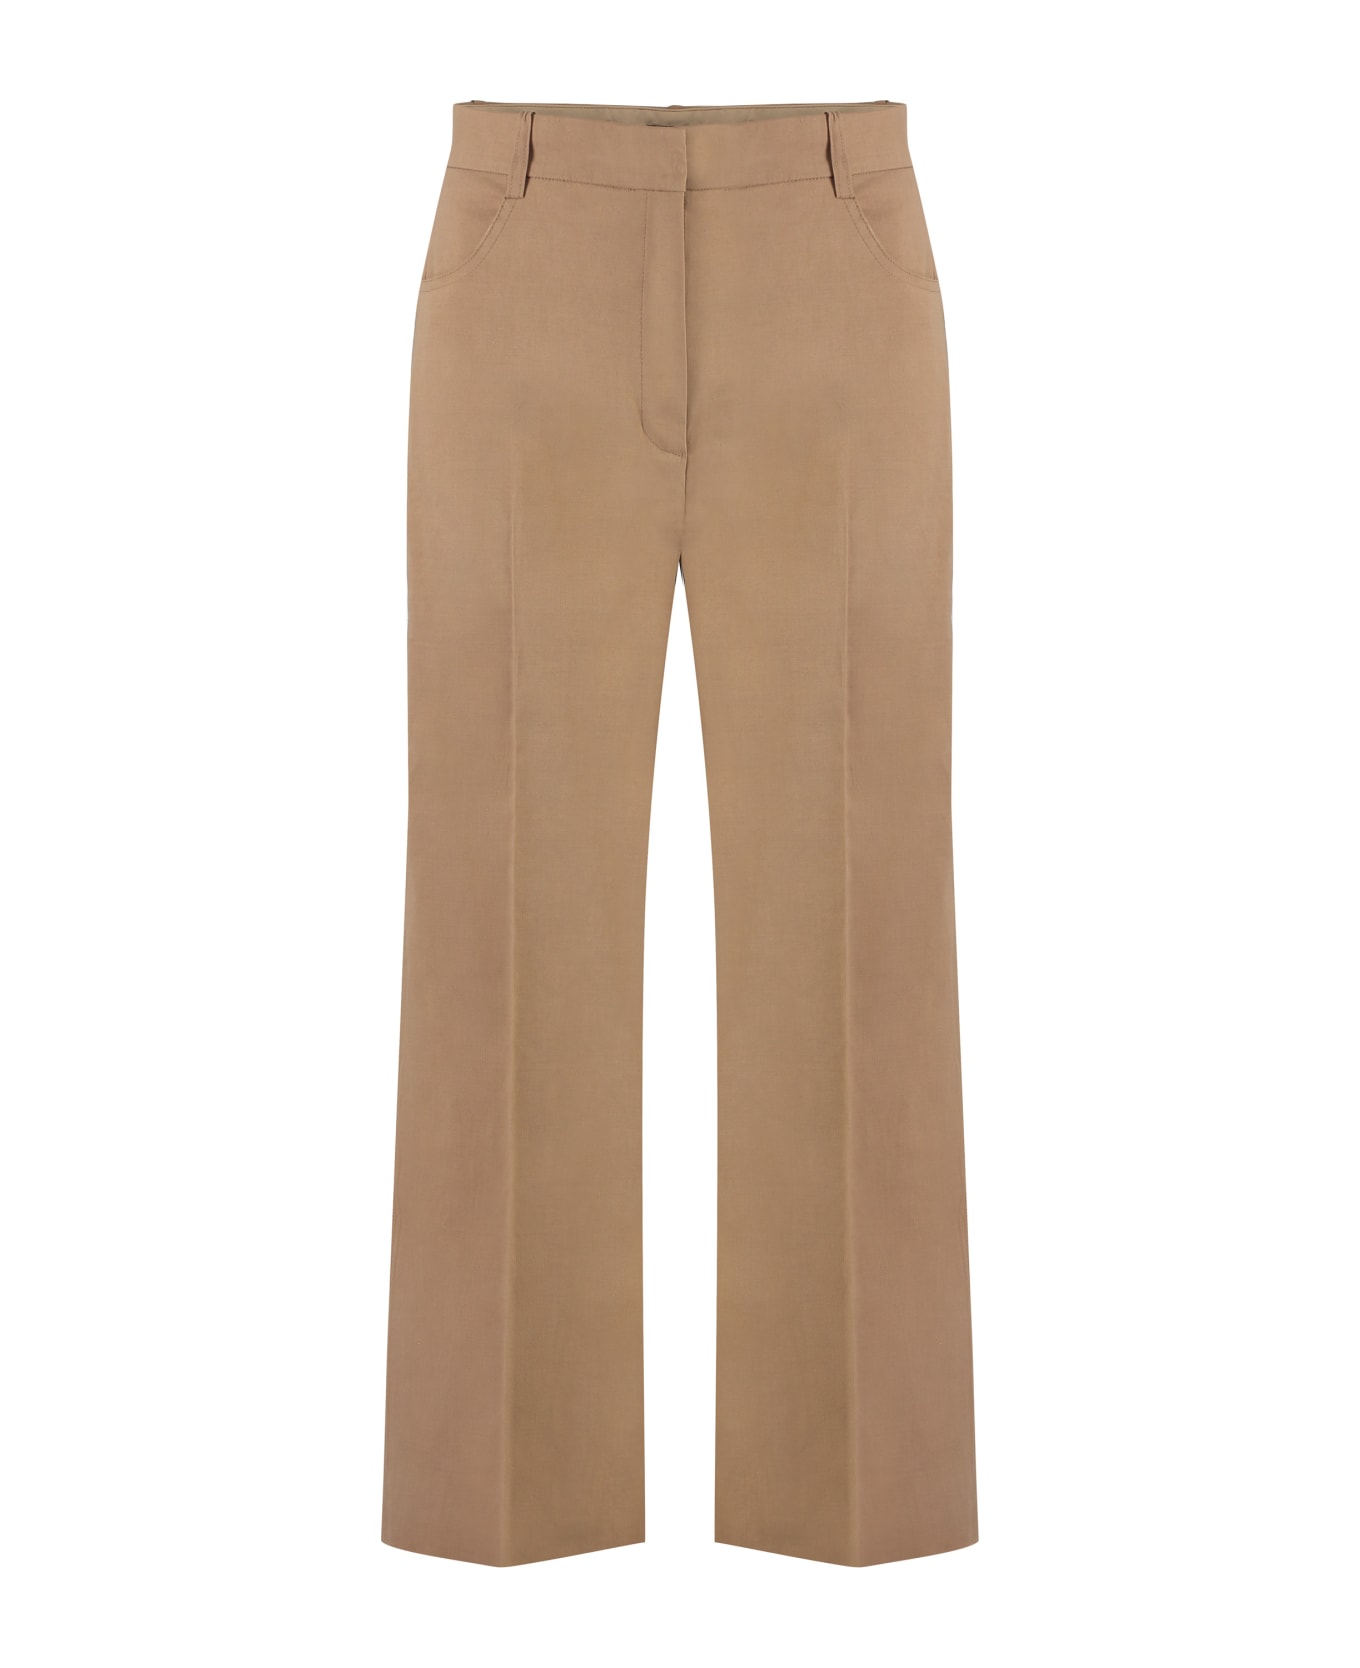 Pinko Protesilao Cropped Trousers - Beige ボトムス